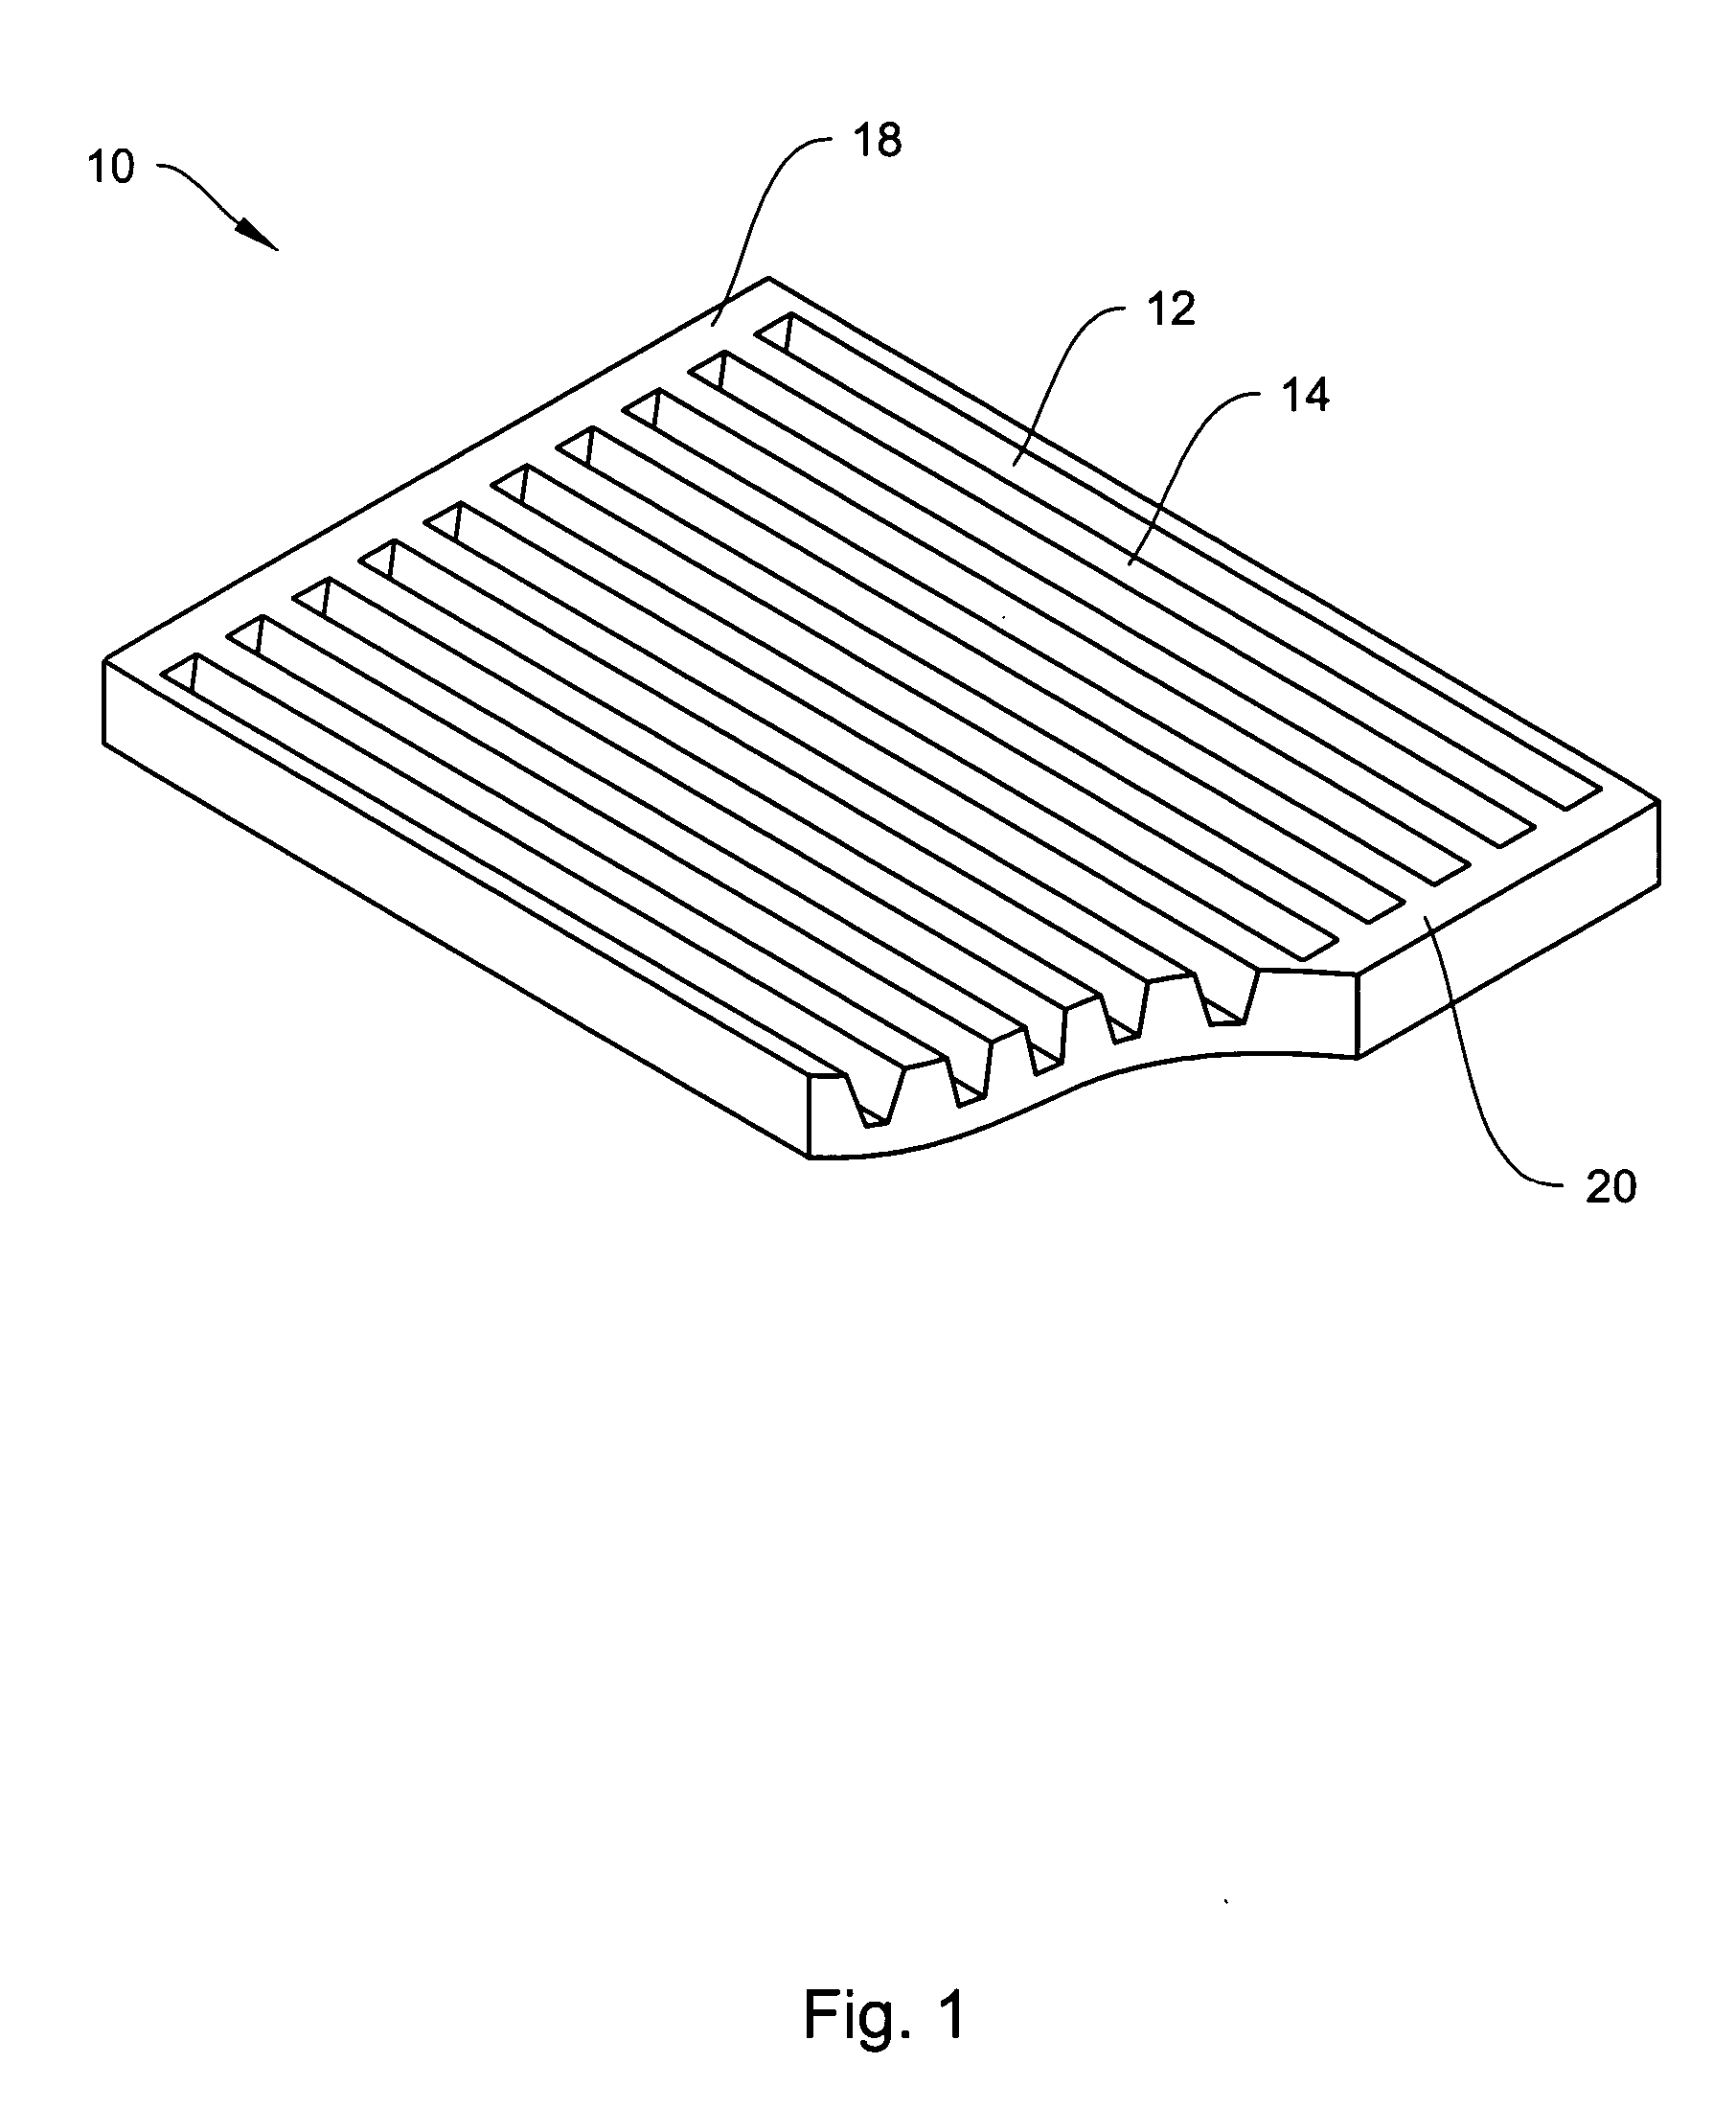 Method for manufacturing a foam core having channel cuts